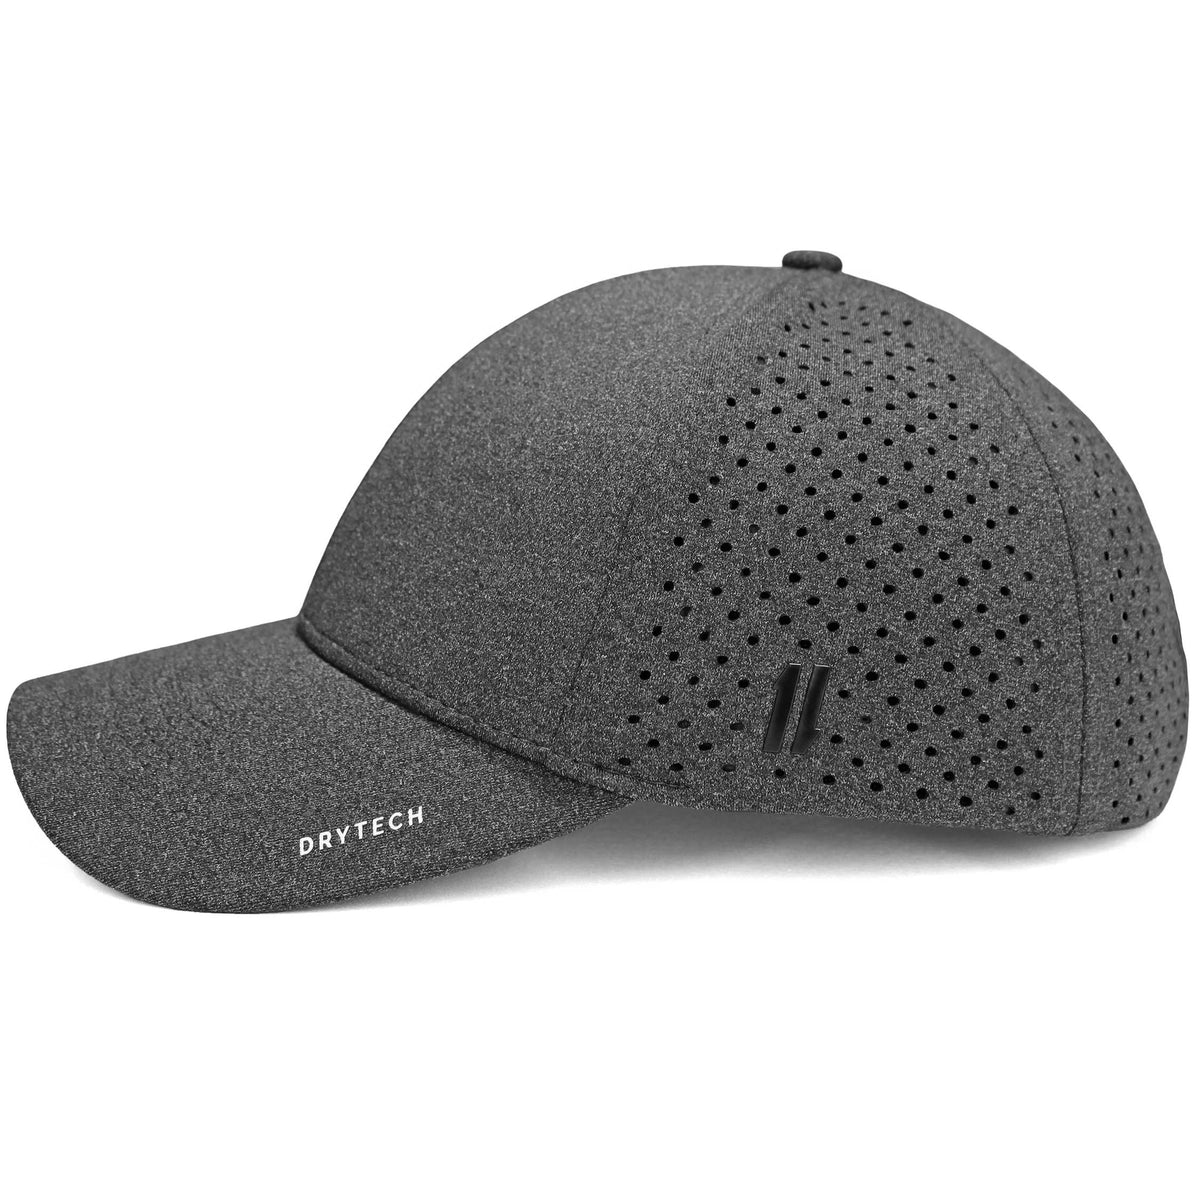 Womens Workout Hat - The Rise & Grind - Shop Athletic Hat, Gym Hat